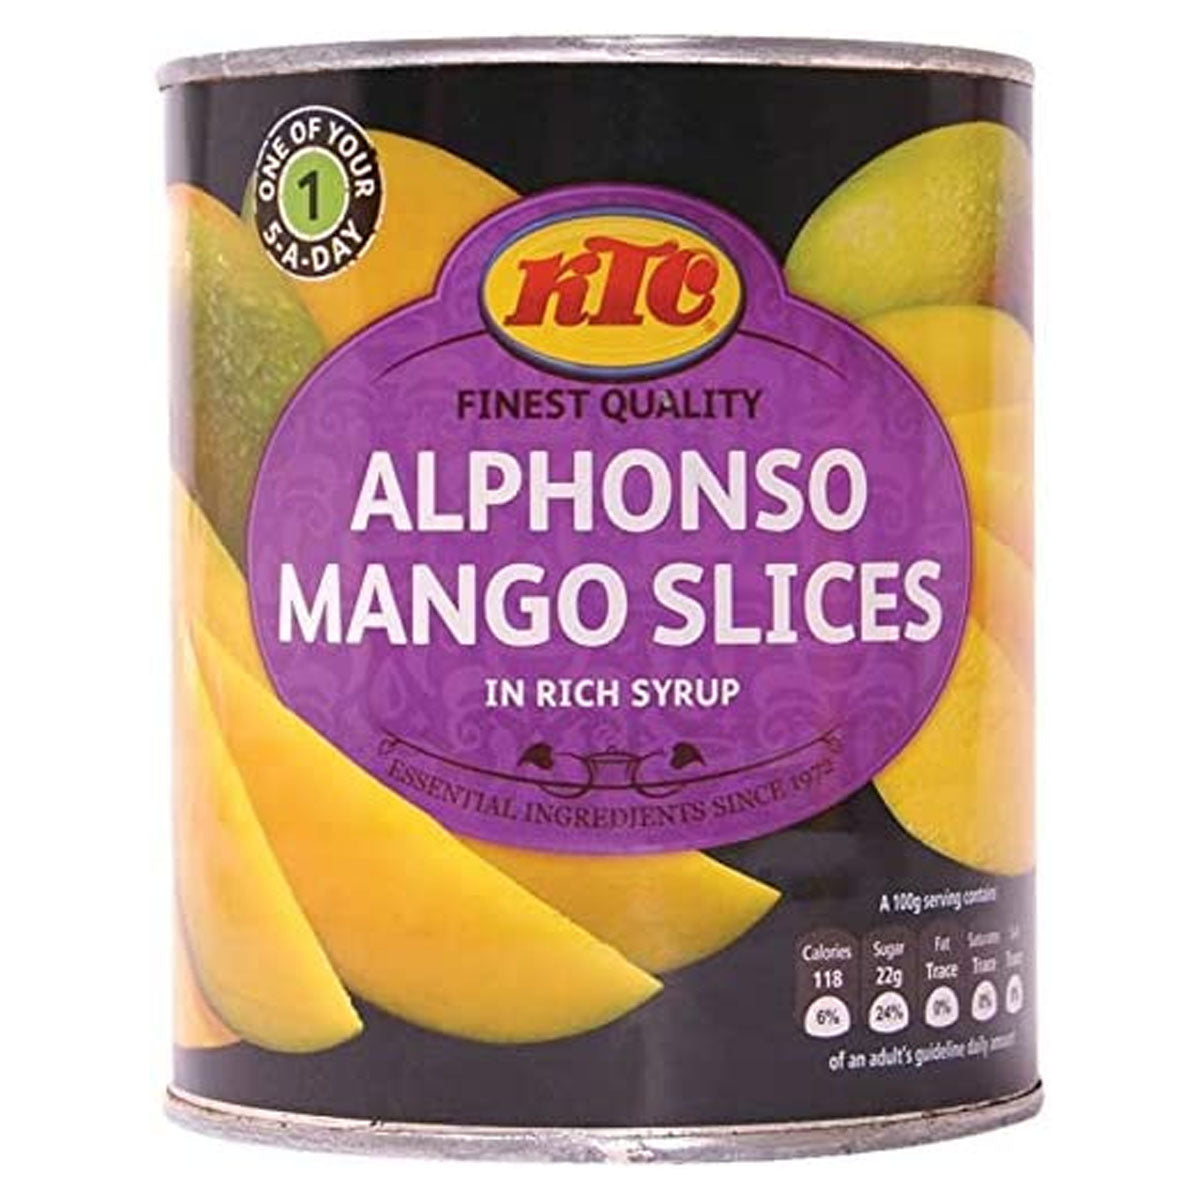 KTC - Alphonso Mango Slices (in Rich Syrup) - 850g - Continental Food Store